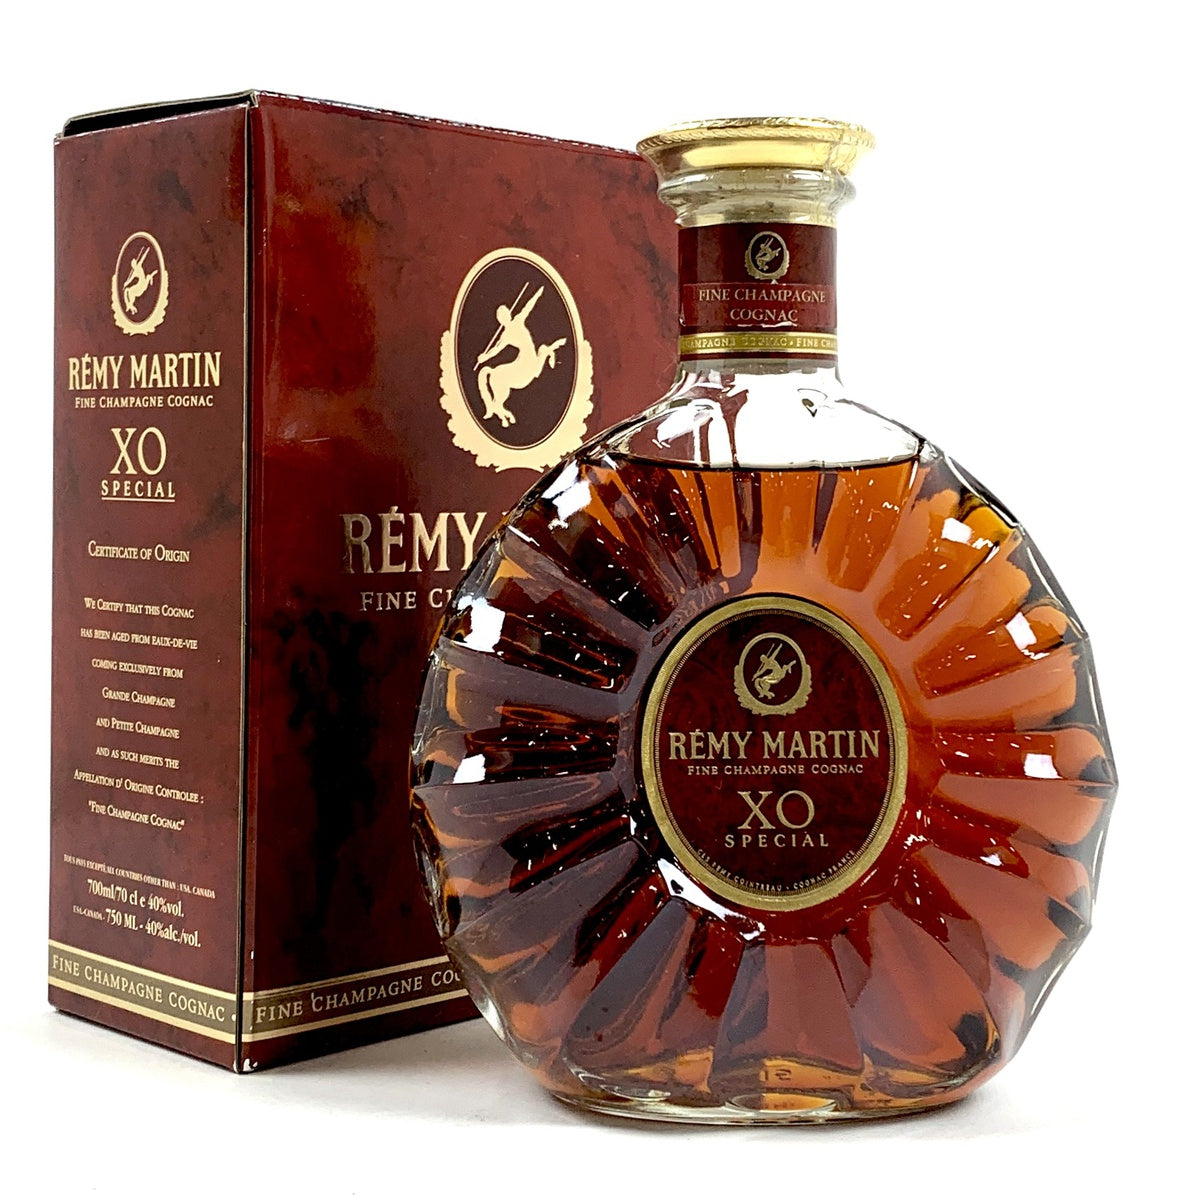 REMY MARTIN XO SPECIAL CAMUS extra箱あり700 | www.causus.be